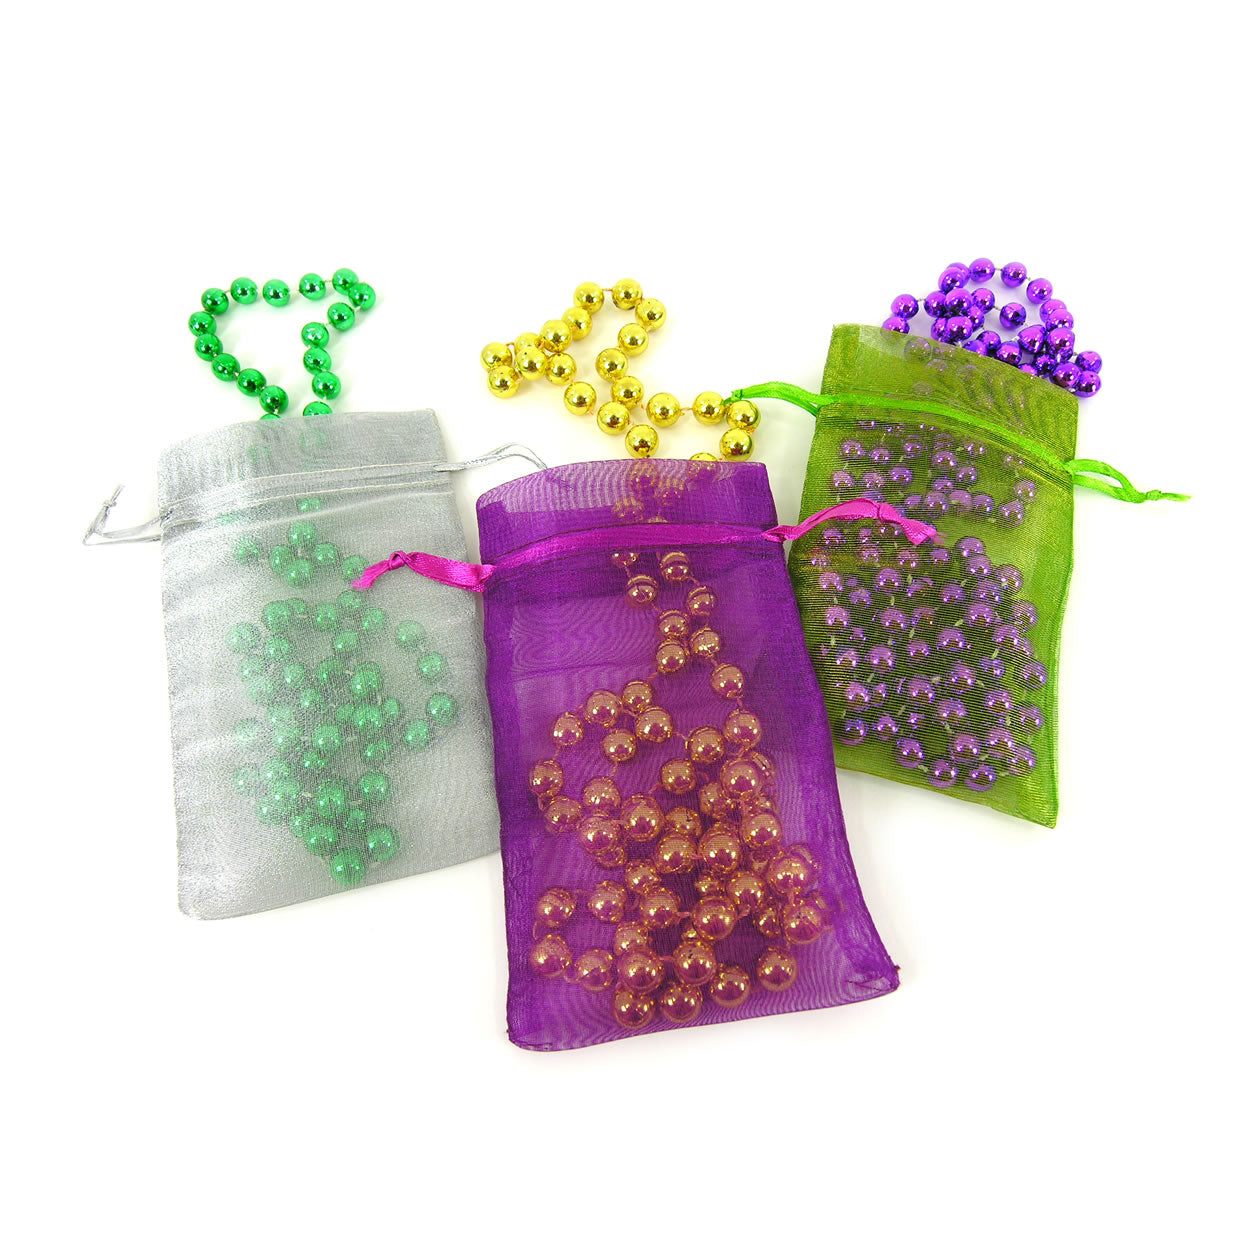 Mardi Gras Favors & Doubloon Bags - Purple, Green, and Gold Organza Doubloon Bags (set of 3)